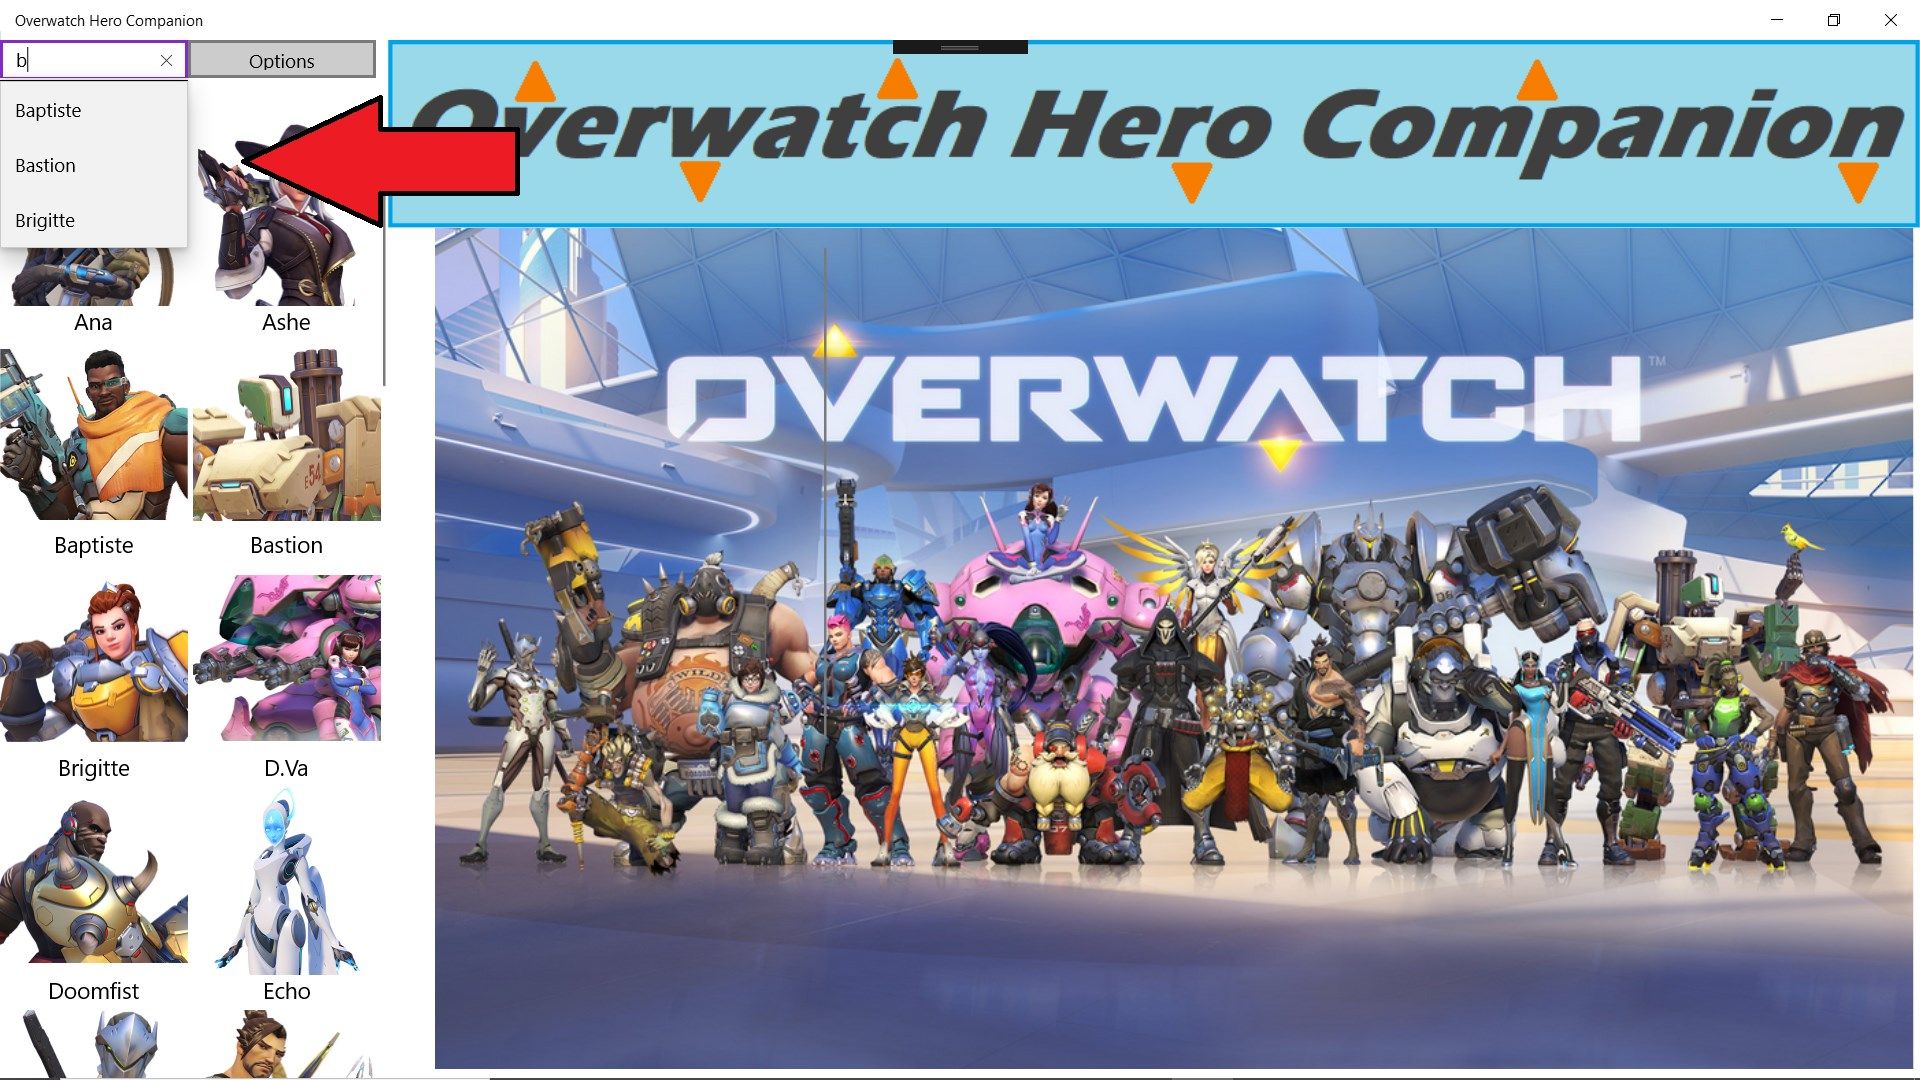 Quickly find any hero using the search bar.